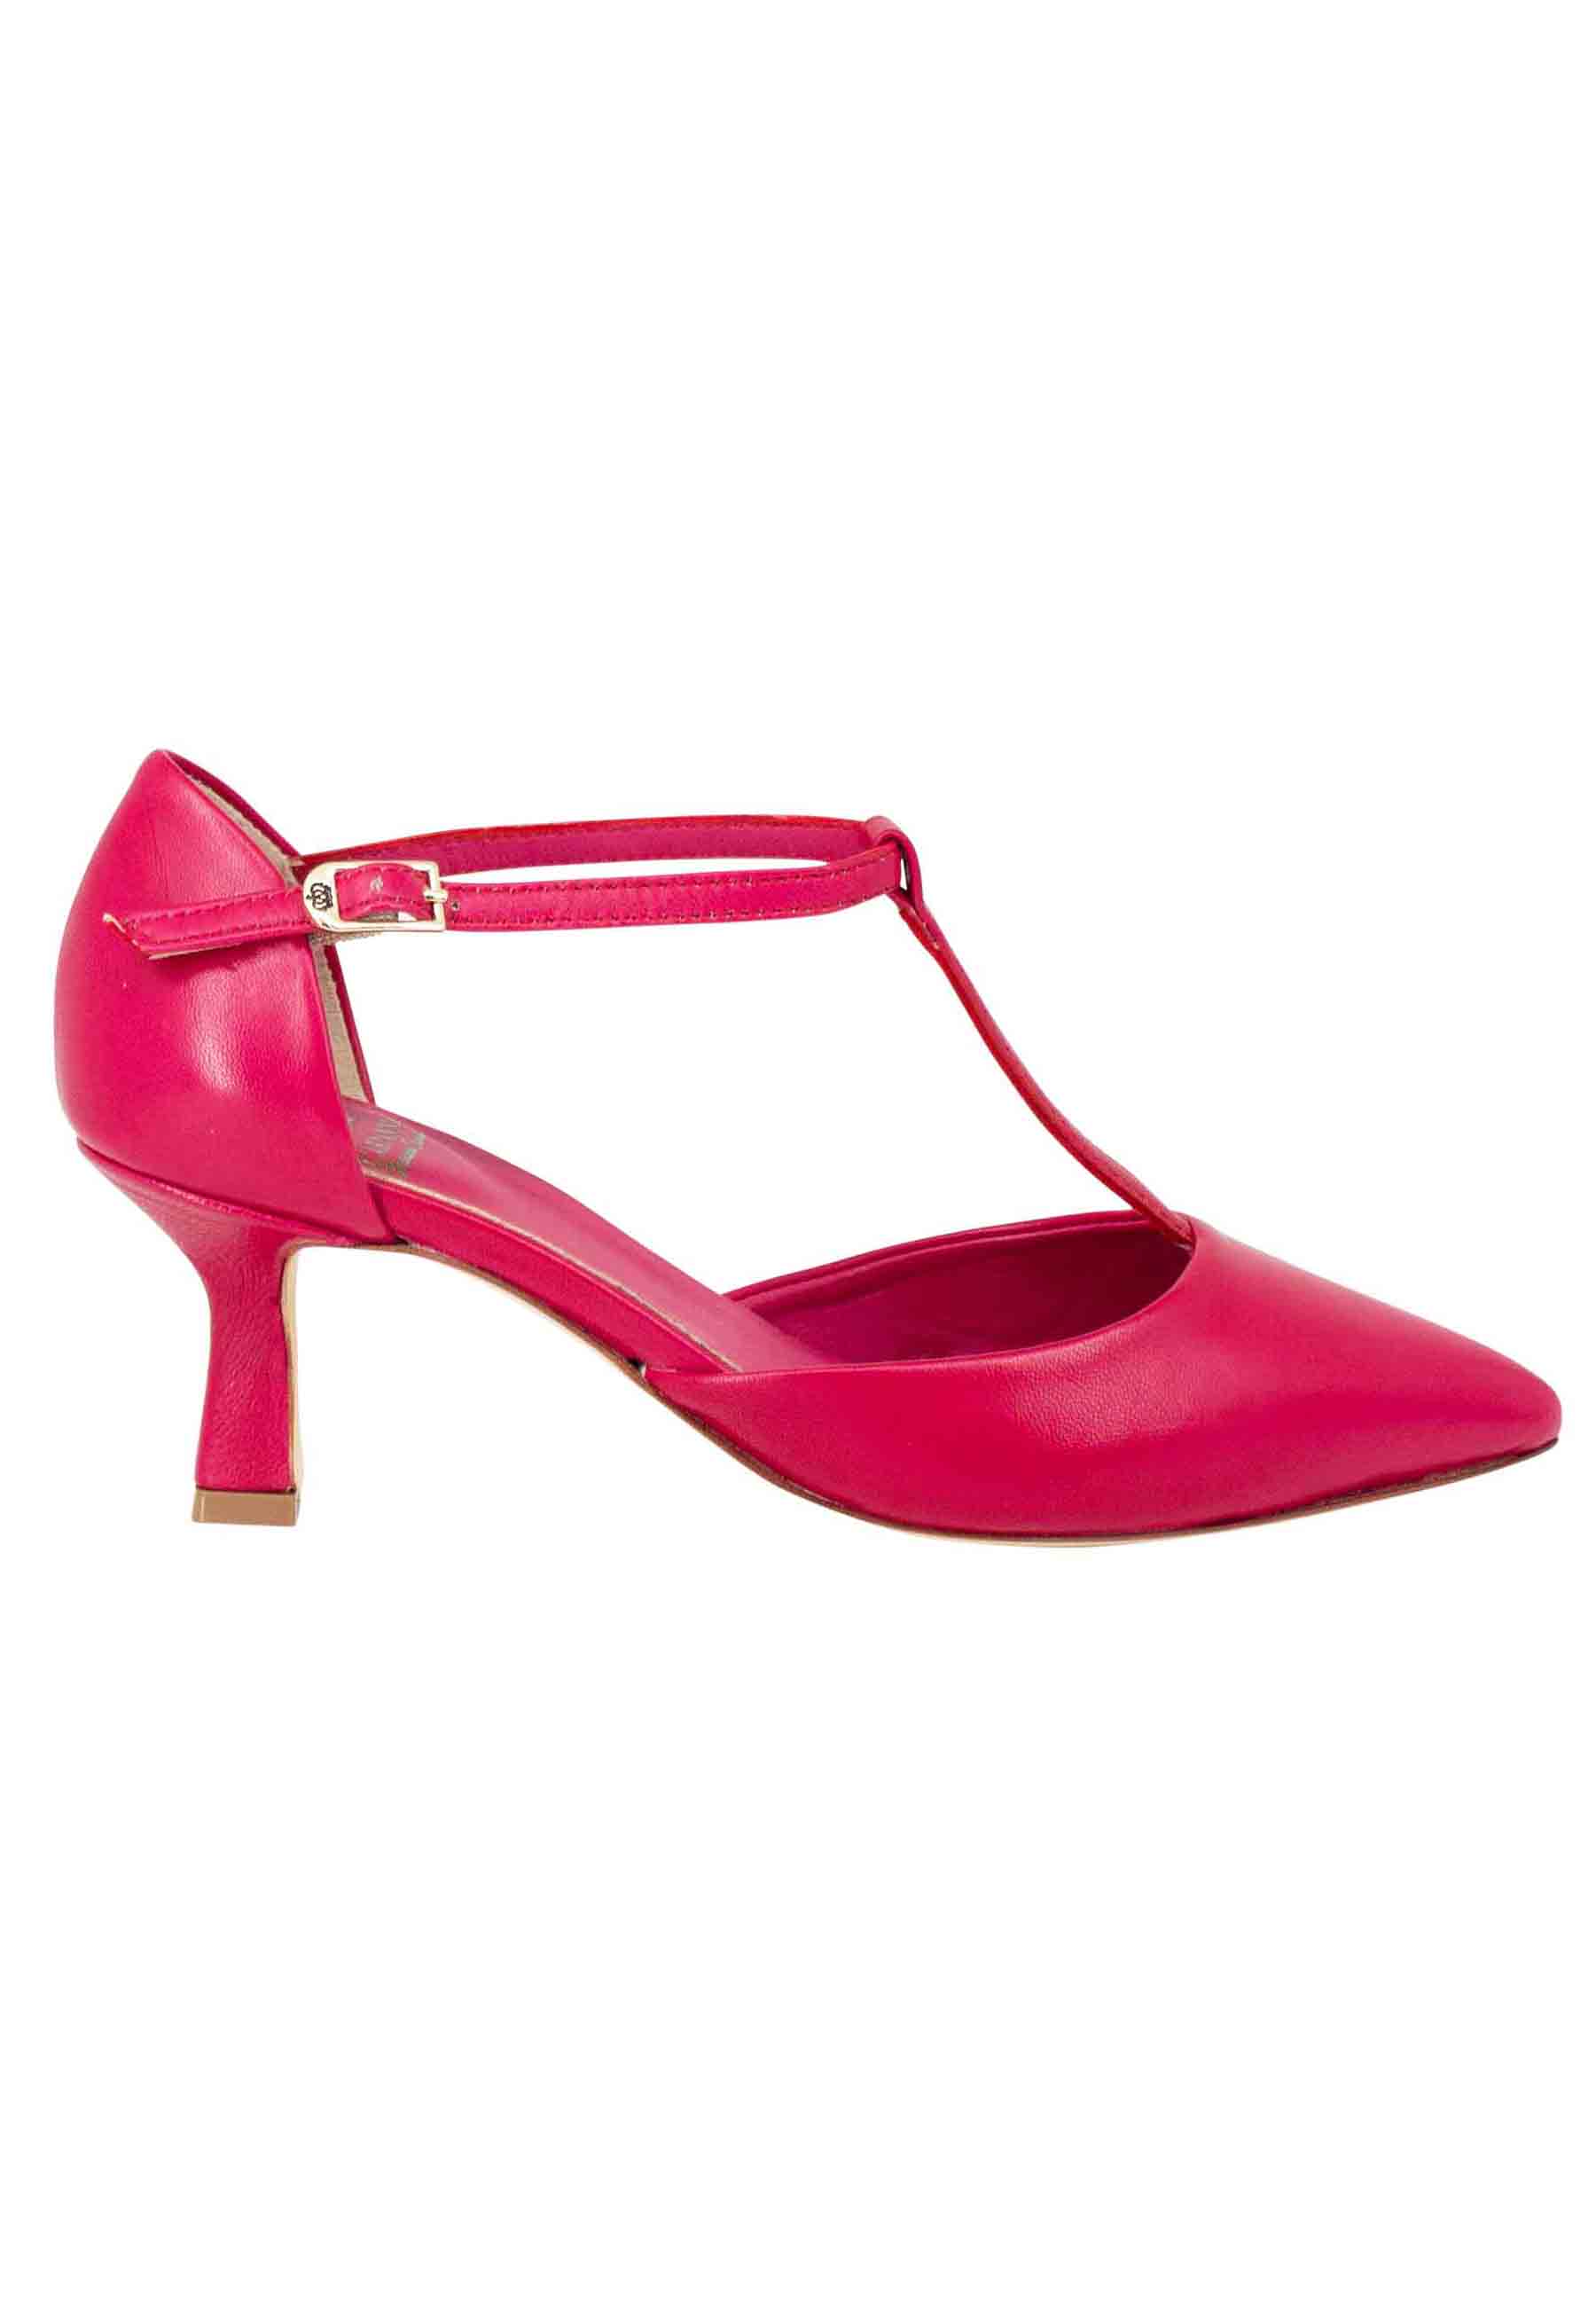 Women's red leather pumps with strap and closed toe